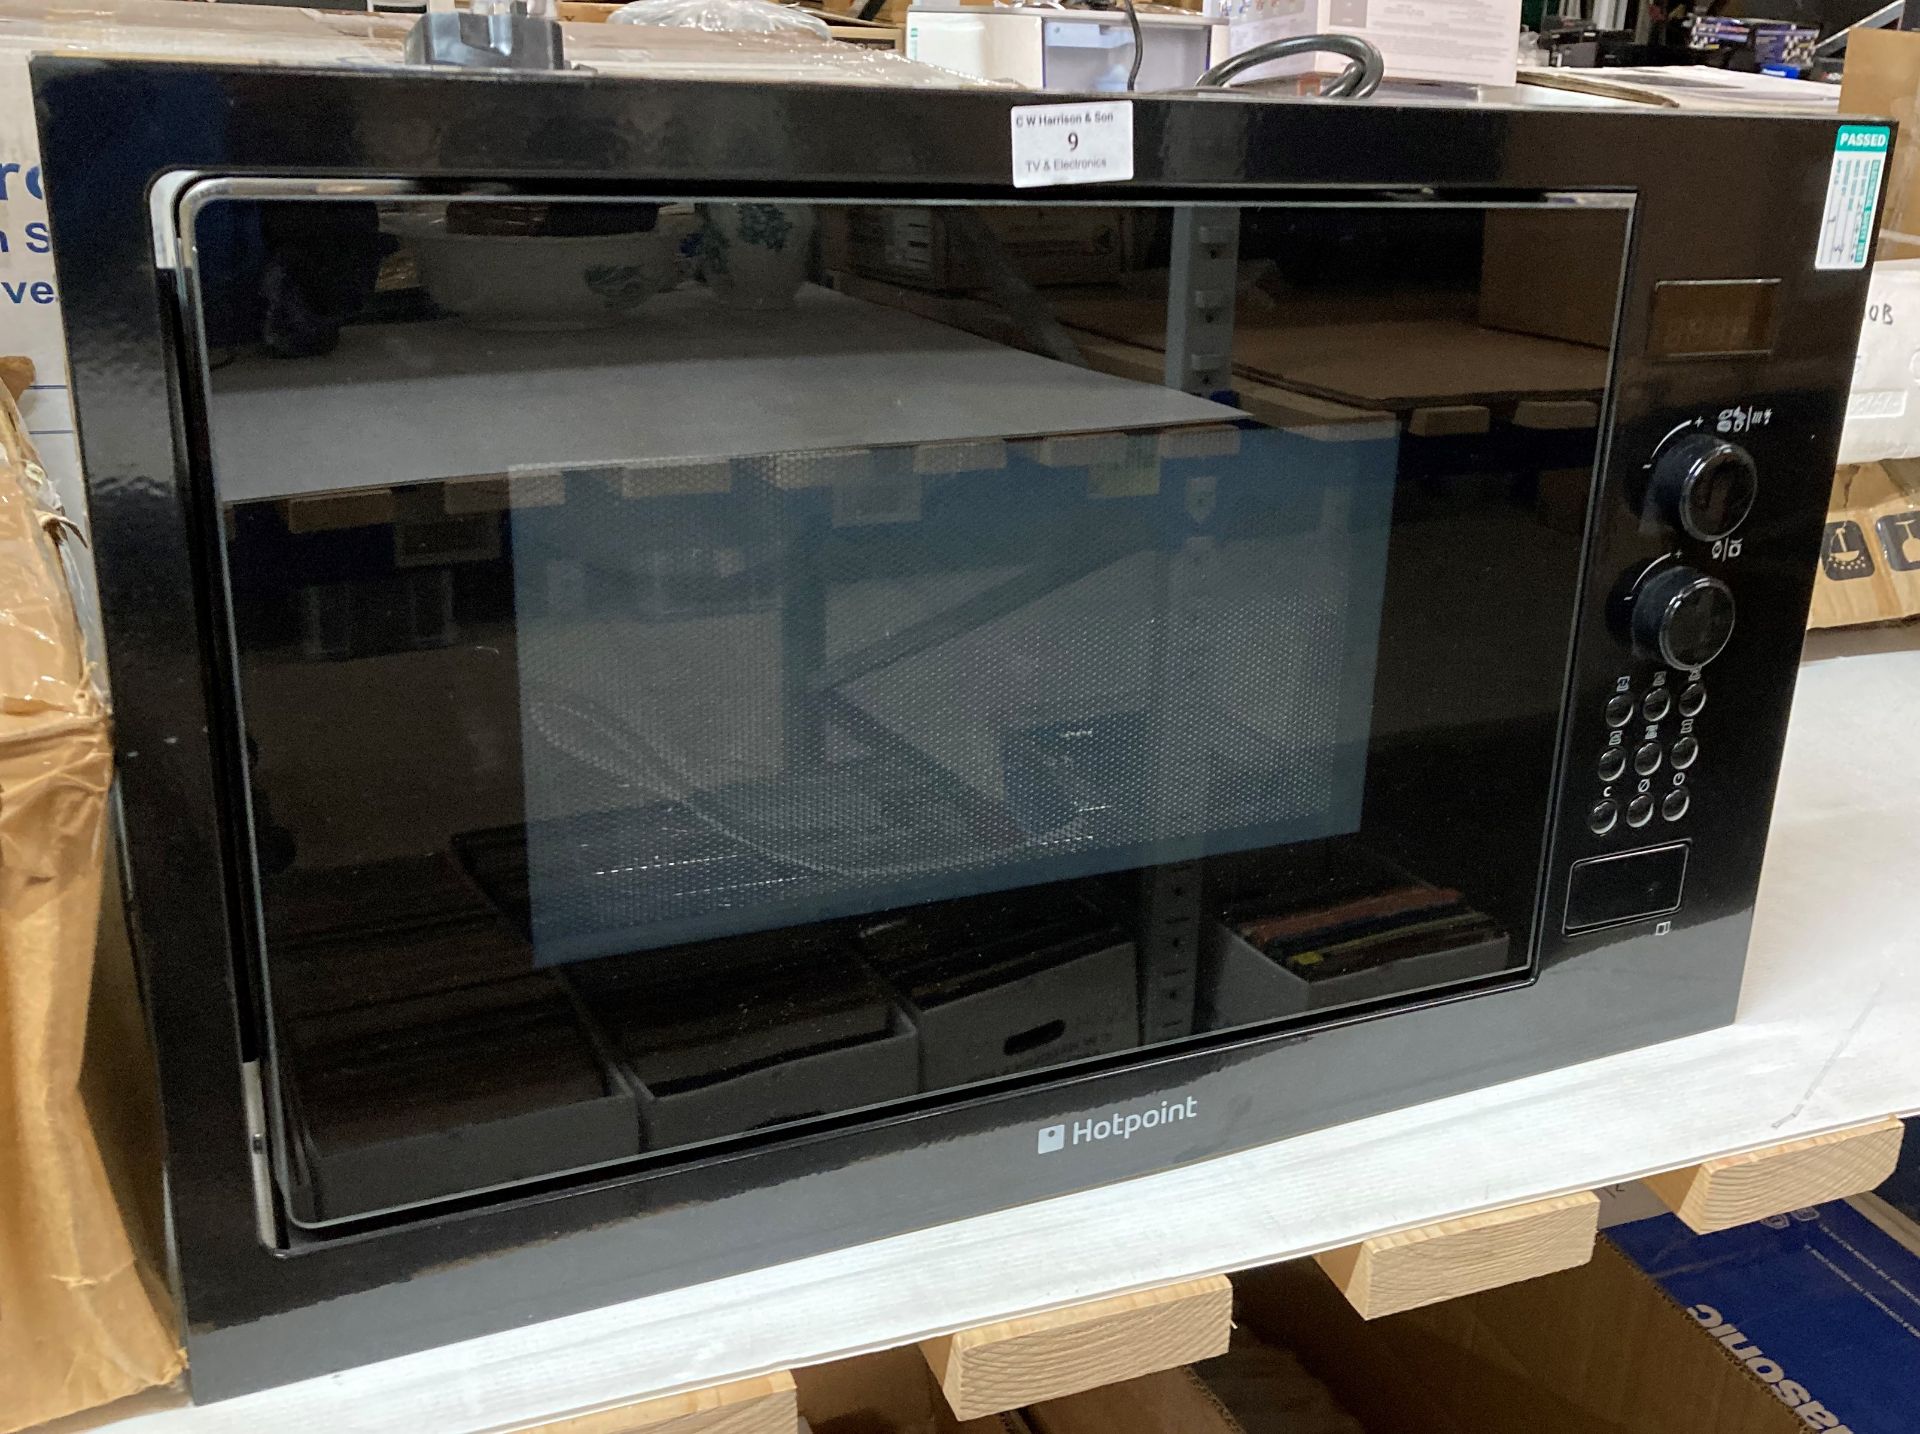 Hotpoint MVH222K built in microwave oven (saleroom location: L12) Further Information